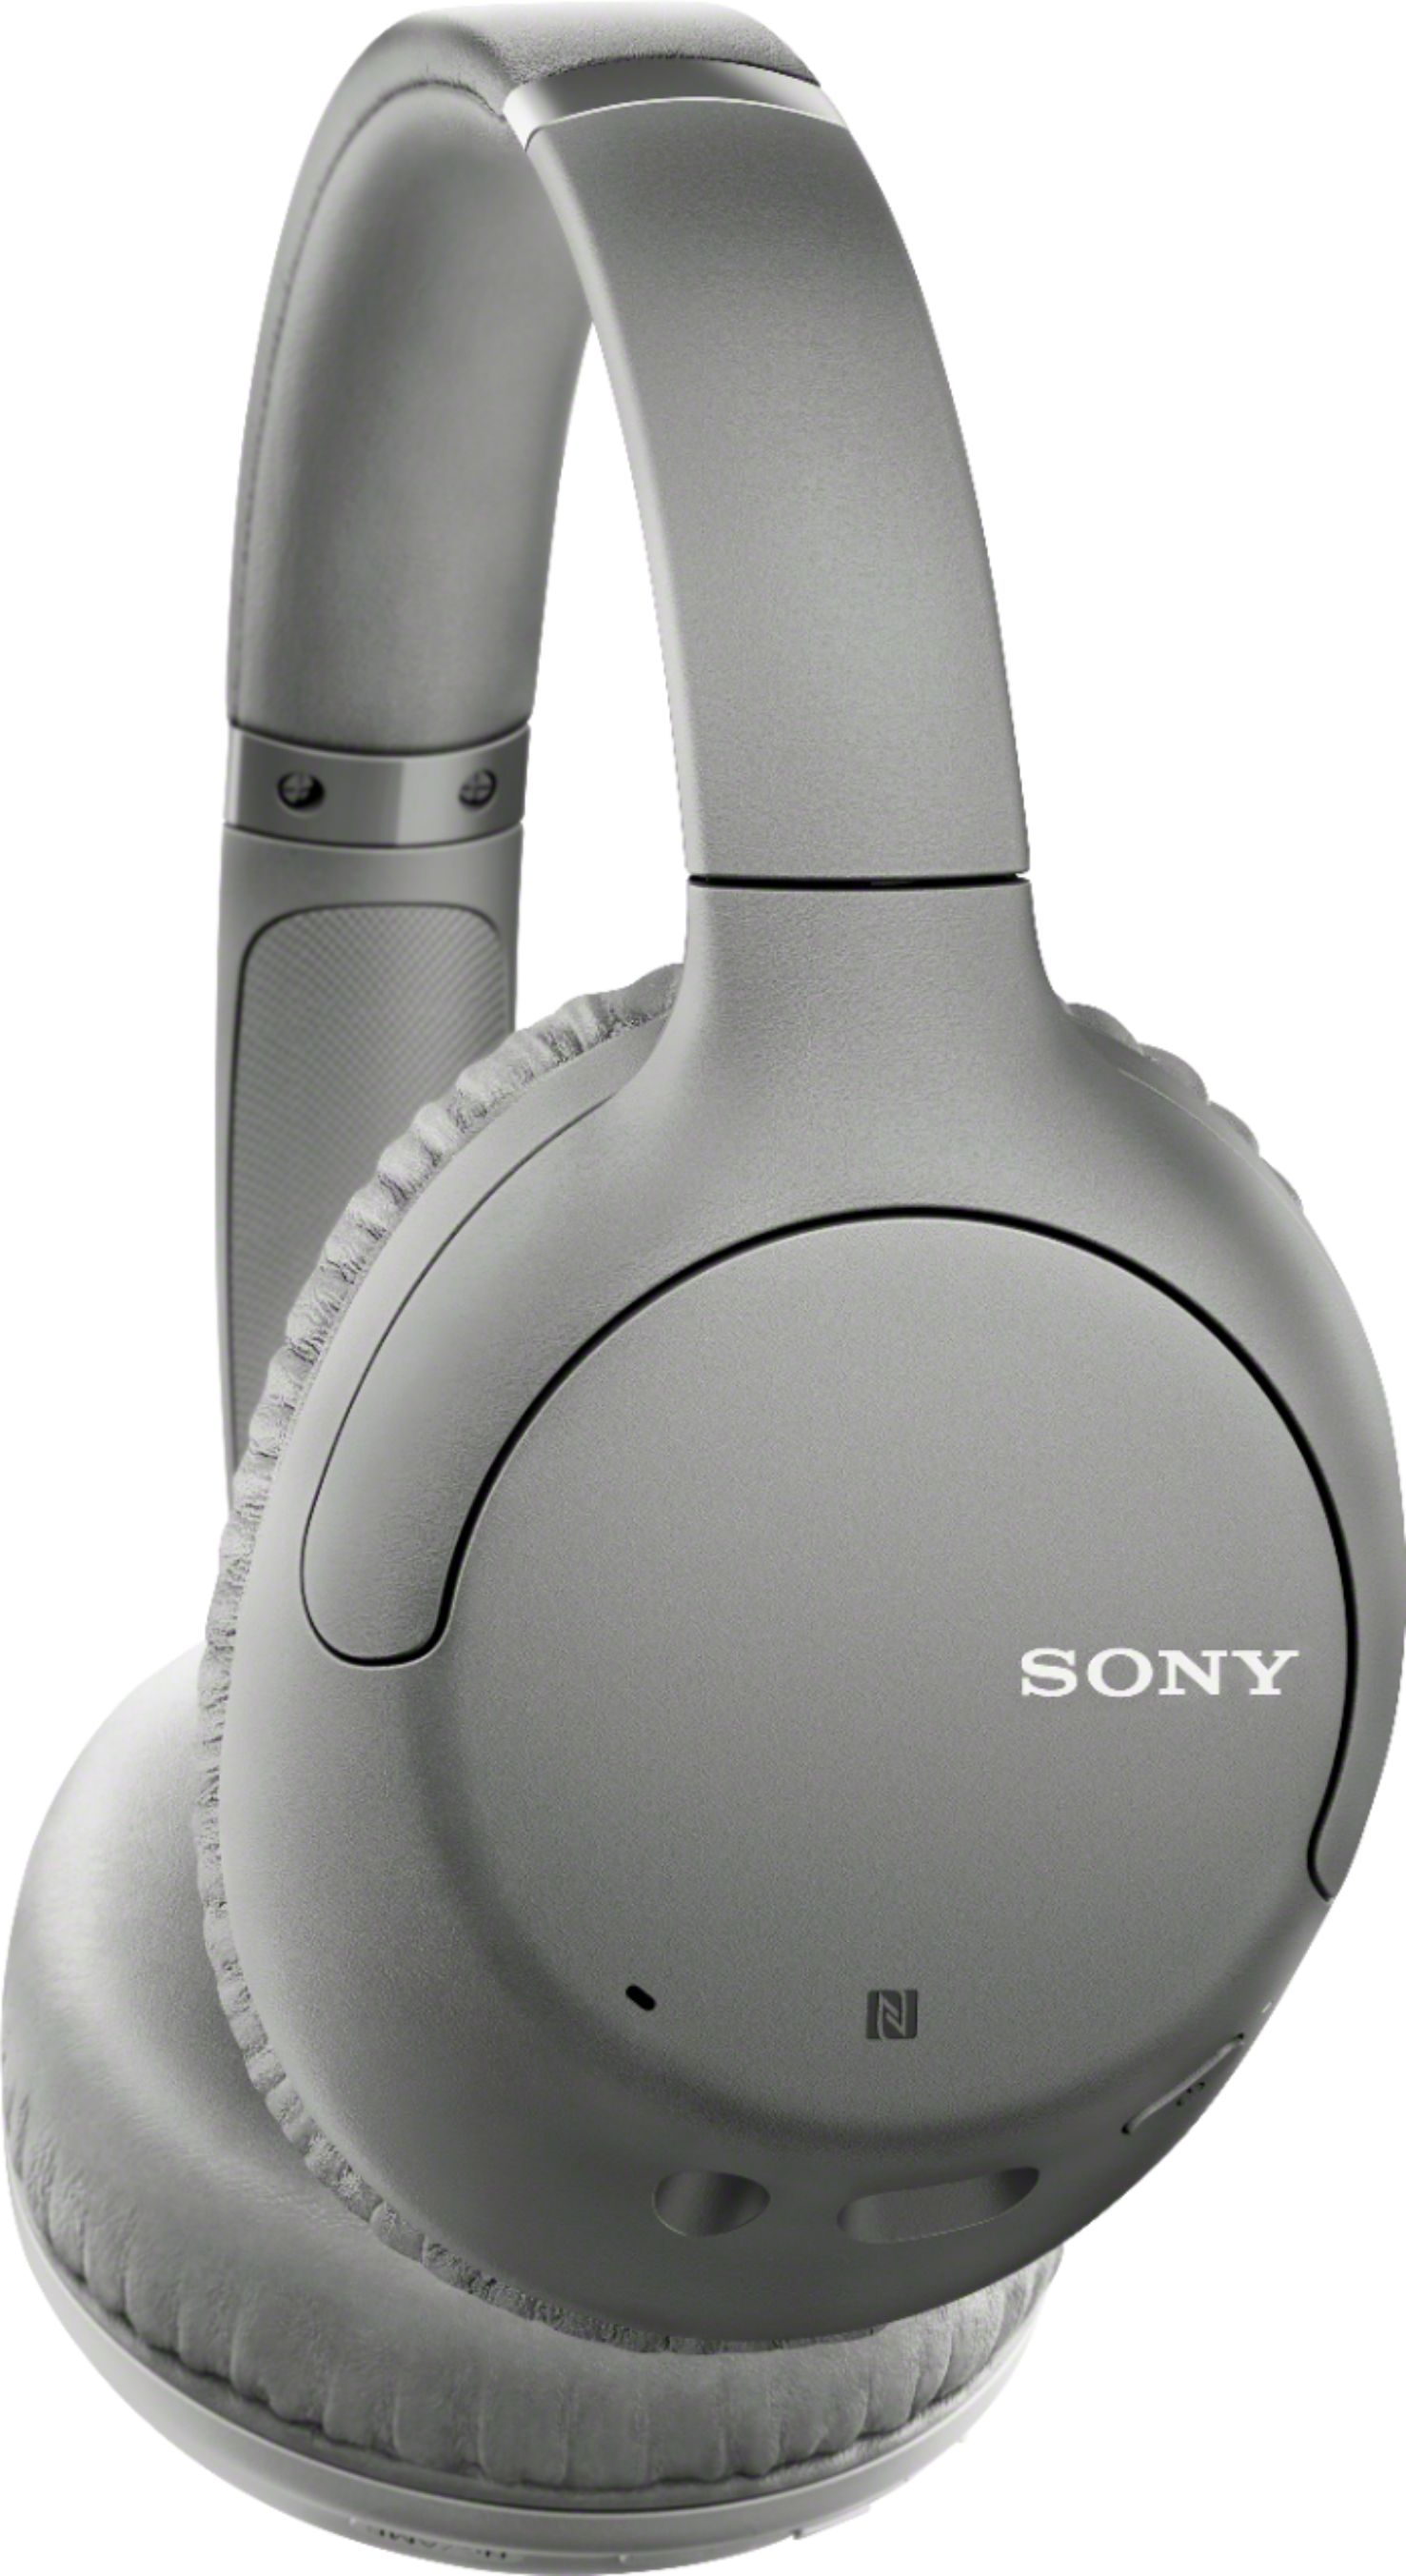 Sony WH-CH710N WAS $149.99 NOW $99.99 SAVE $50